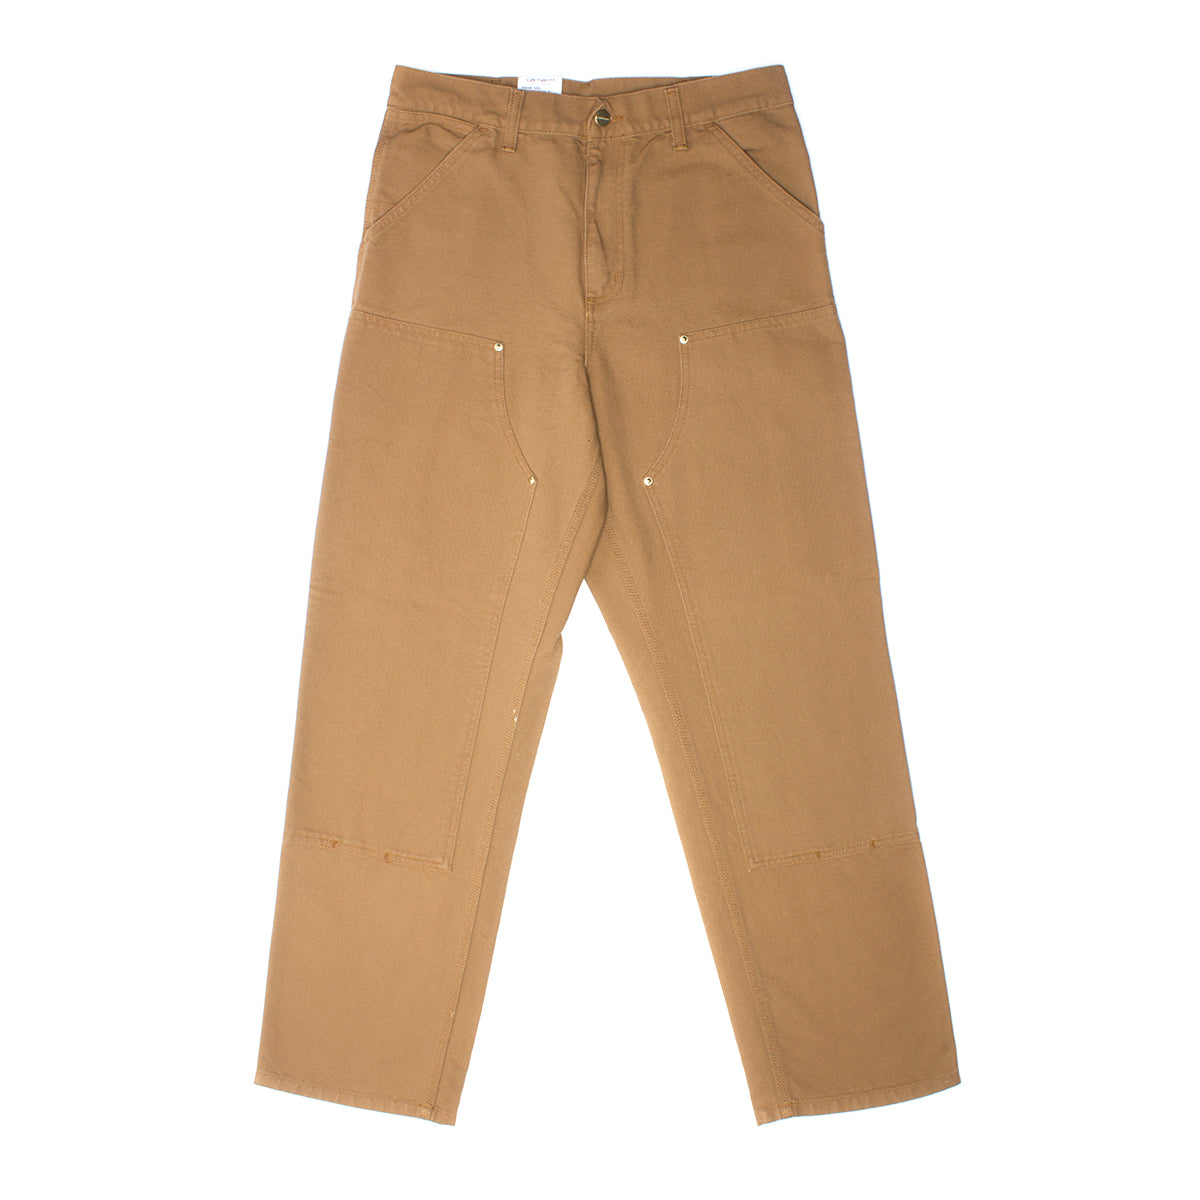 Carhartt WIP | Double Knee Pant Style # I031501-HZ01 Color : Hamilton Brown